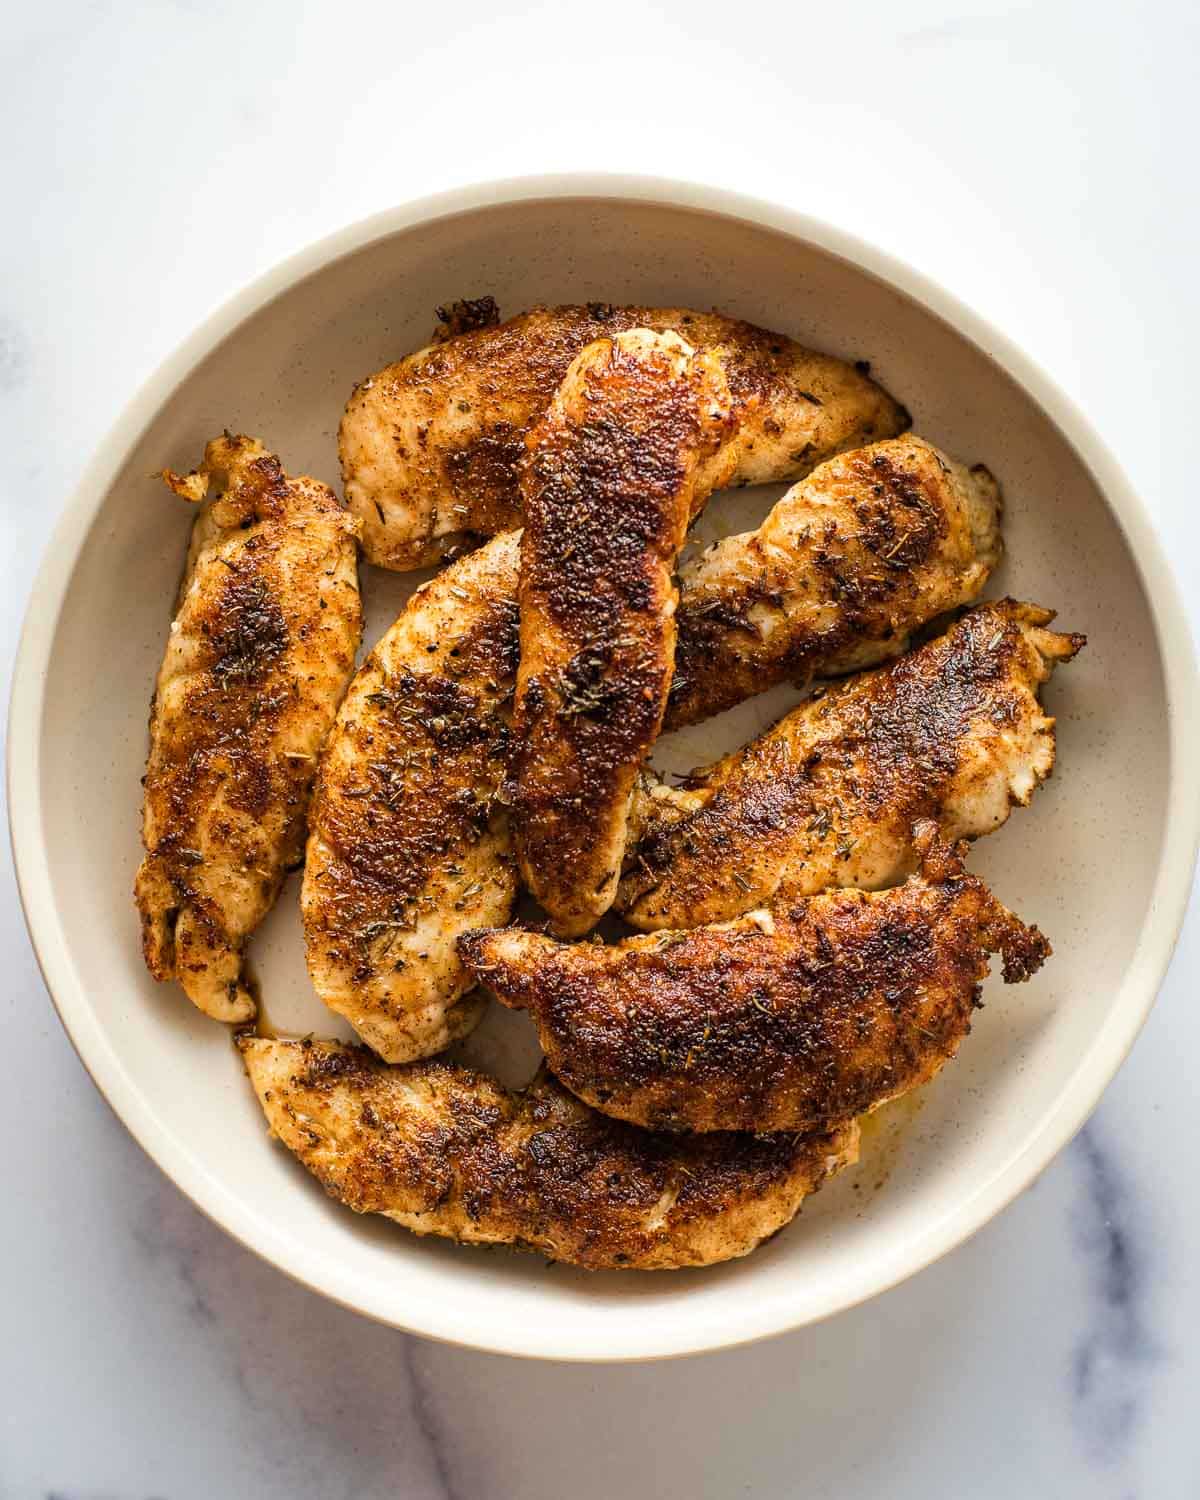 Blackened chicken tenders in a white bowl on a table.